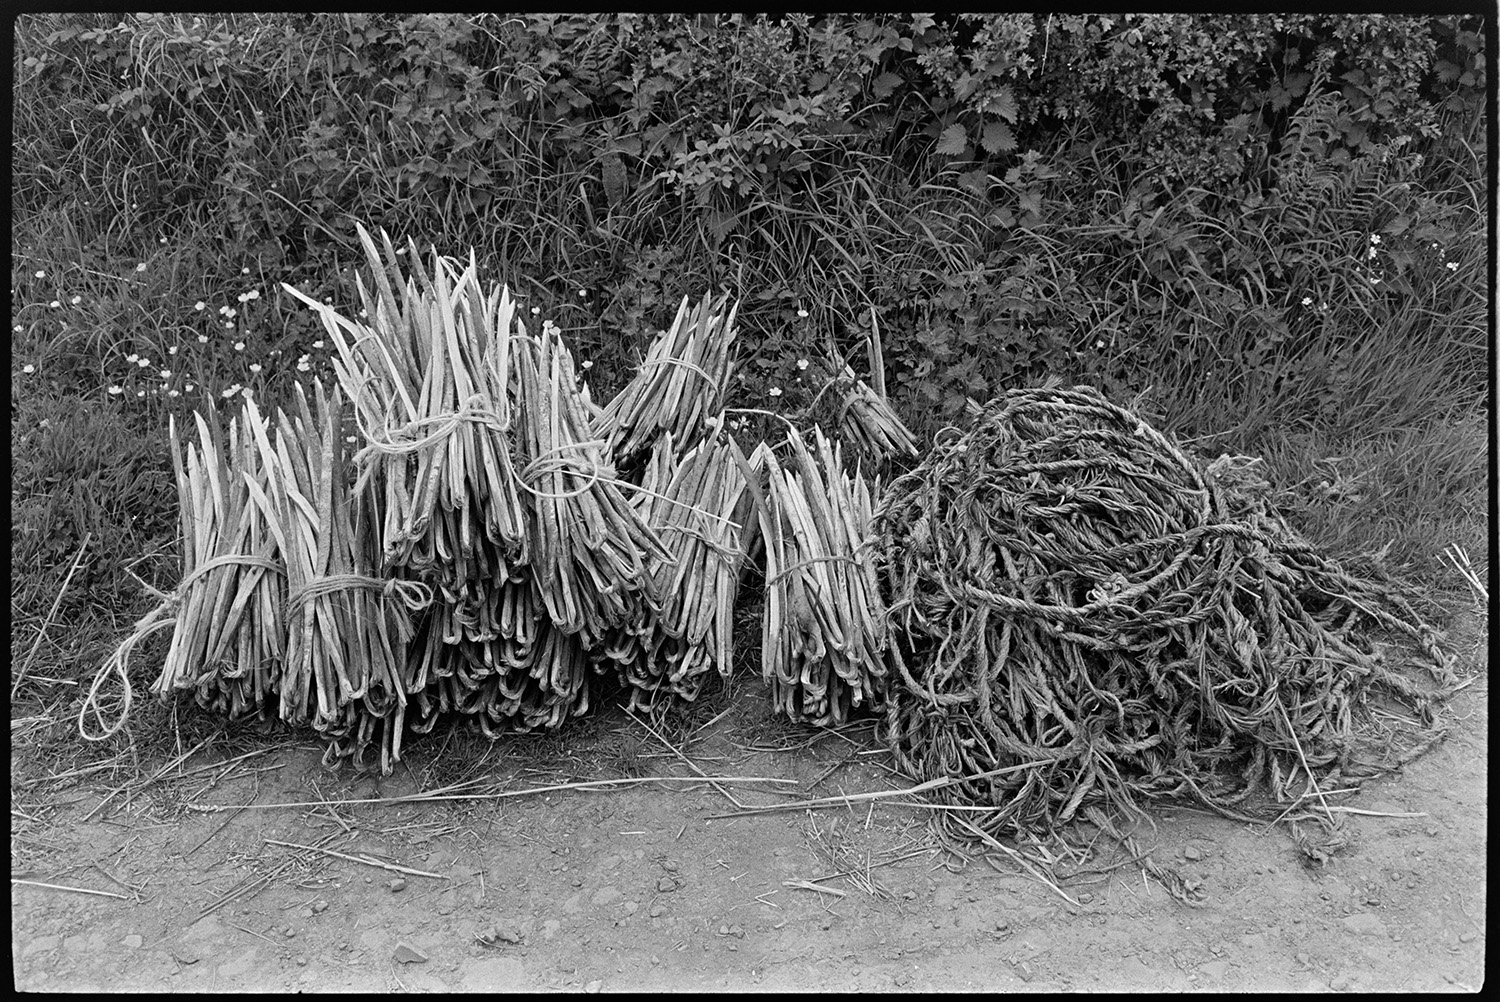 Reed comber at work, pile of ropes and spars. 
[A pile or rope and bundles of spars used in thatched, by a hedge at Westacott Barton, Riddlecombe.]